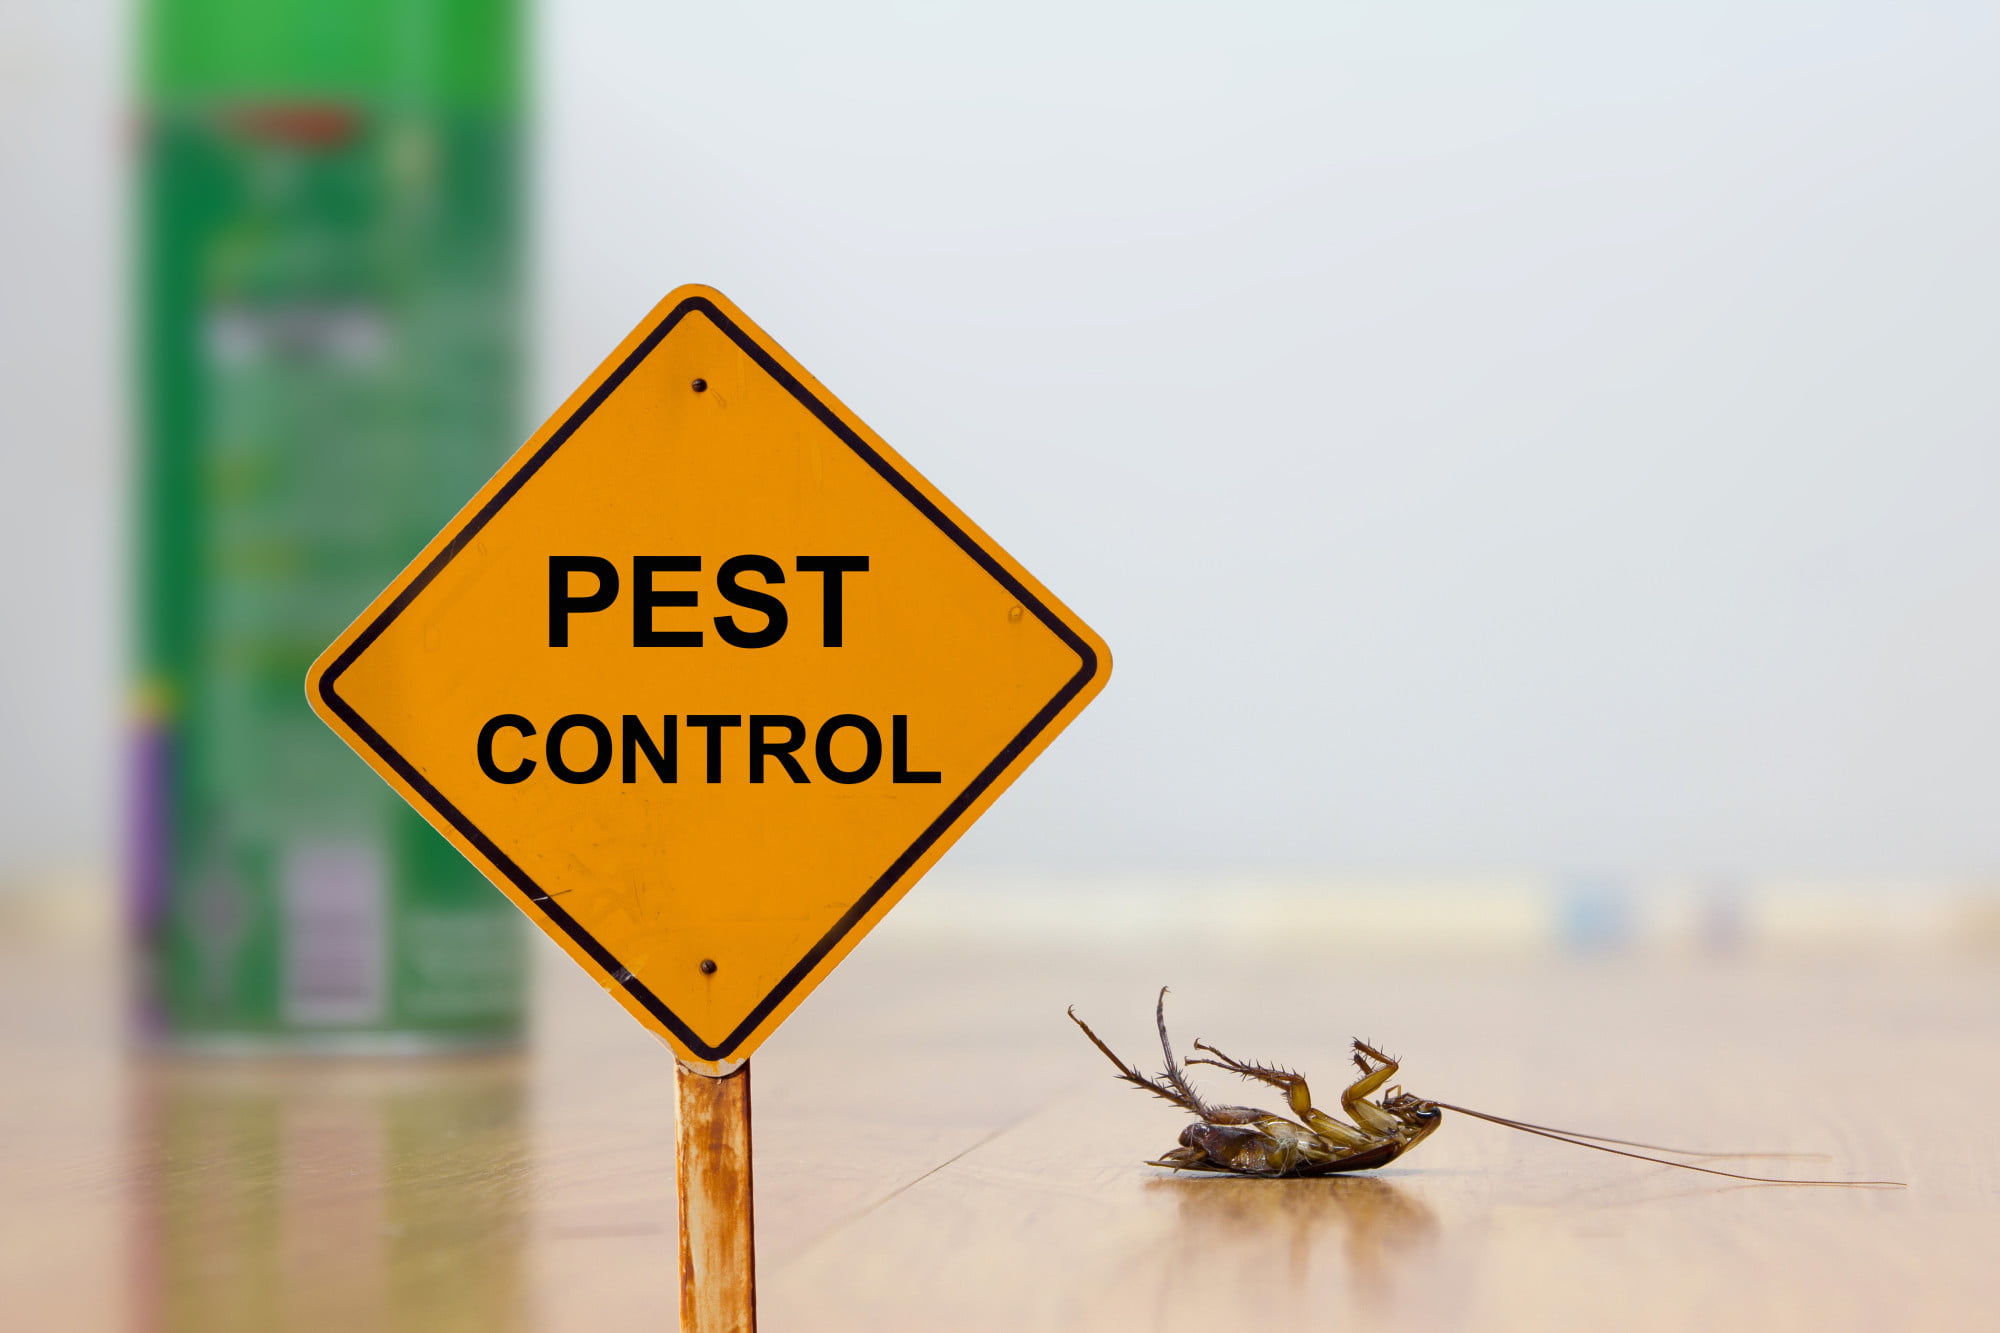 It is important to find a pest control service that is both reliable and professional. This is how to choose the best pest control service for your needs.